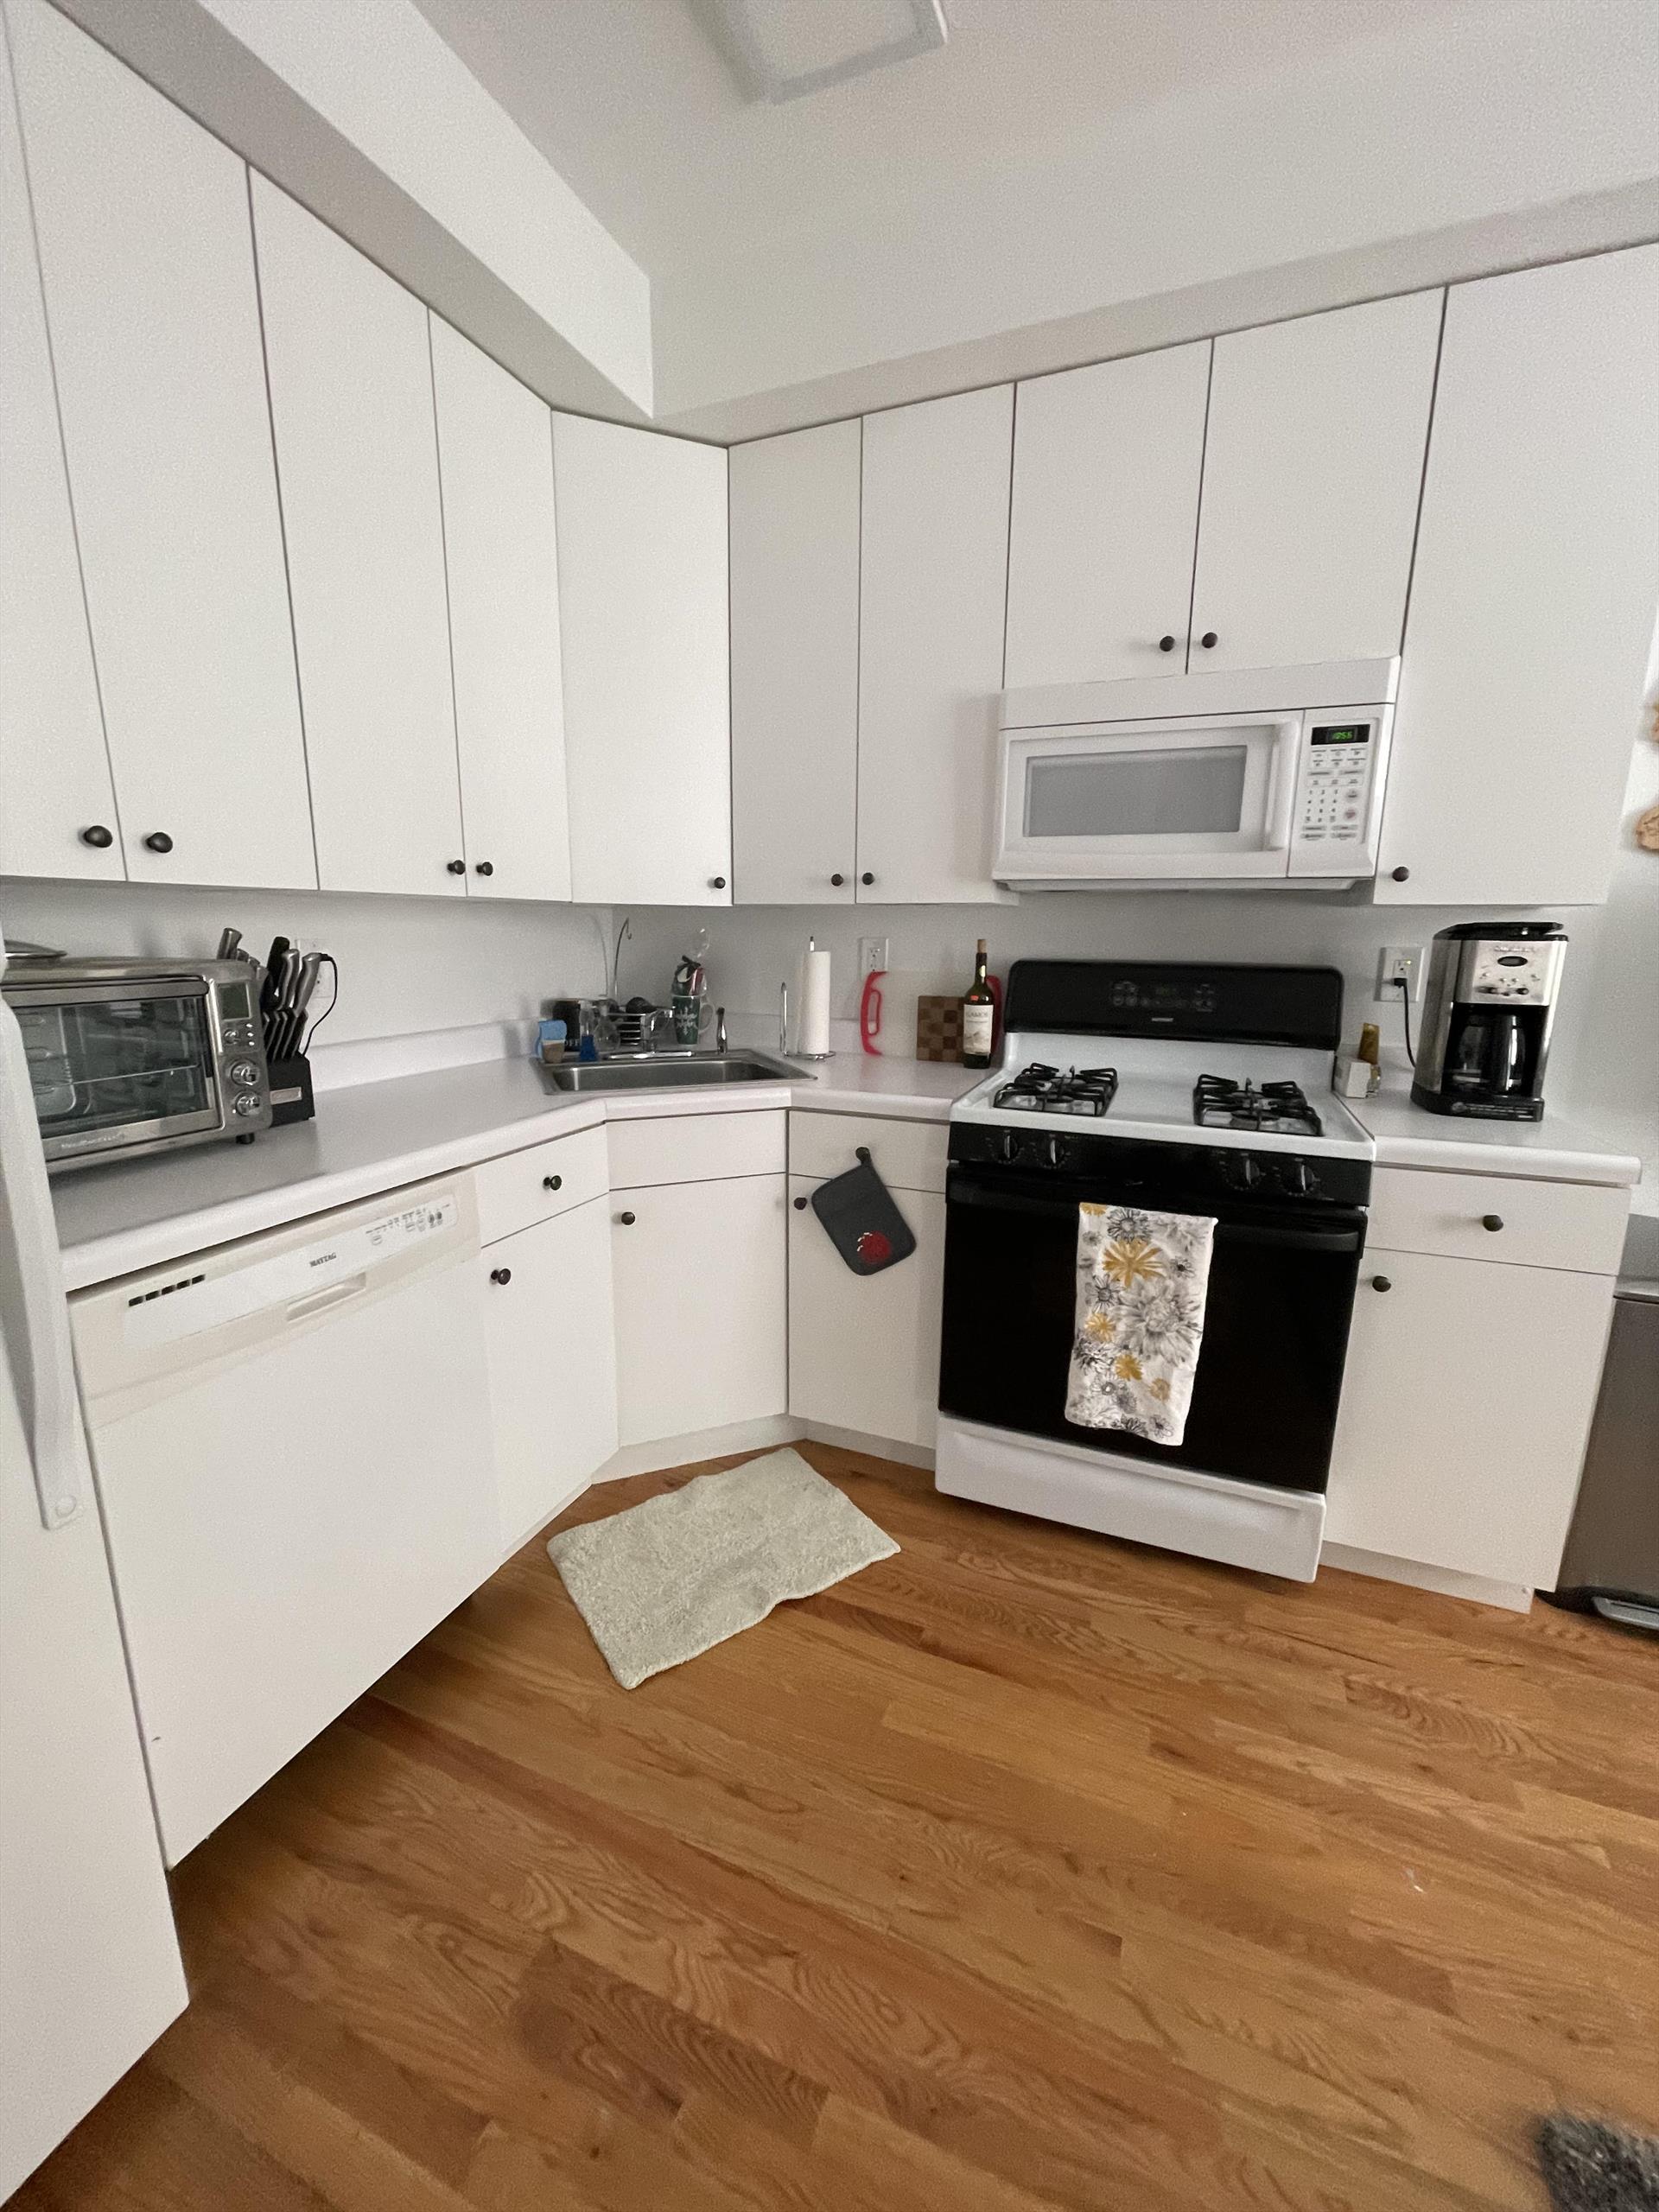 Large one bedroom apartment with central air, hardwood floors, intercom, and spacious closet space. YOUR OWN LOCKED STORAGE ROOM ON GROUND LEVEL. Also, use of coin operated, shared laundry room on ground level for your own personal use at no extra charge. Brokers fee is 10% of the gross rent. 